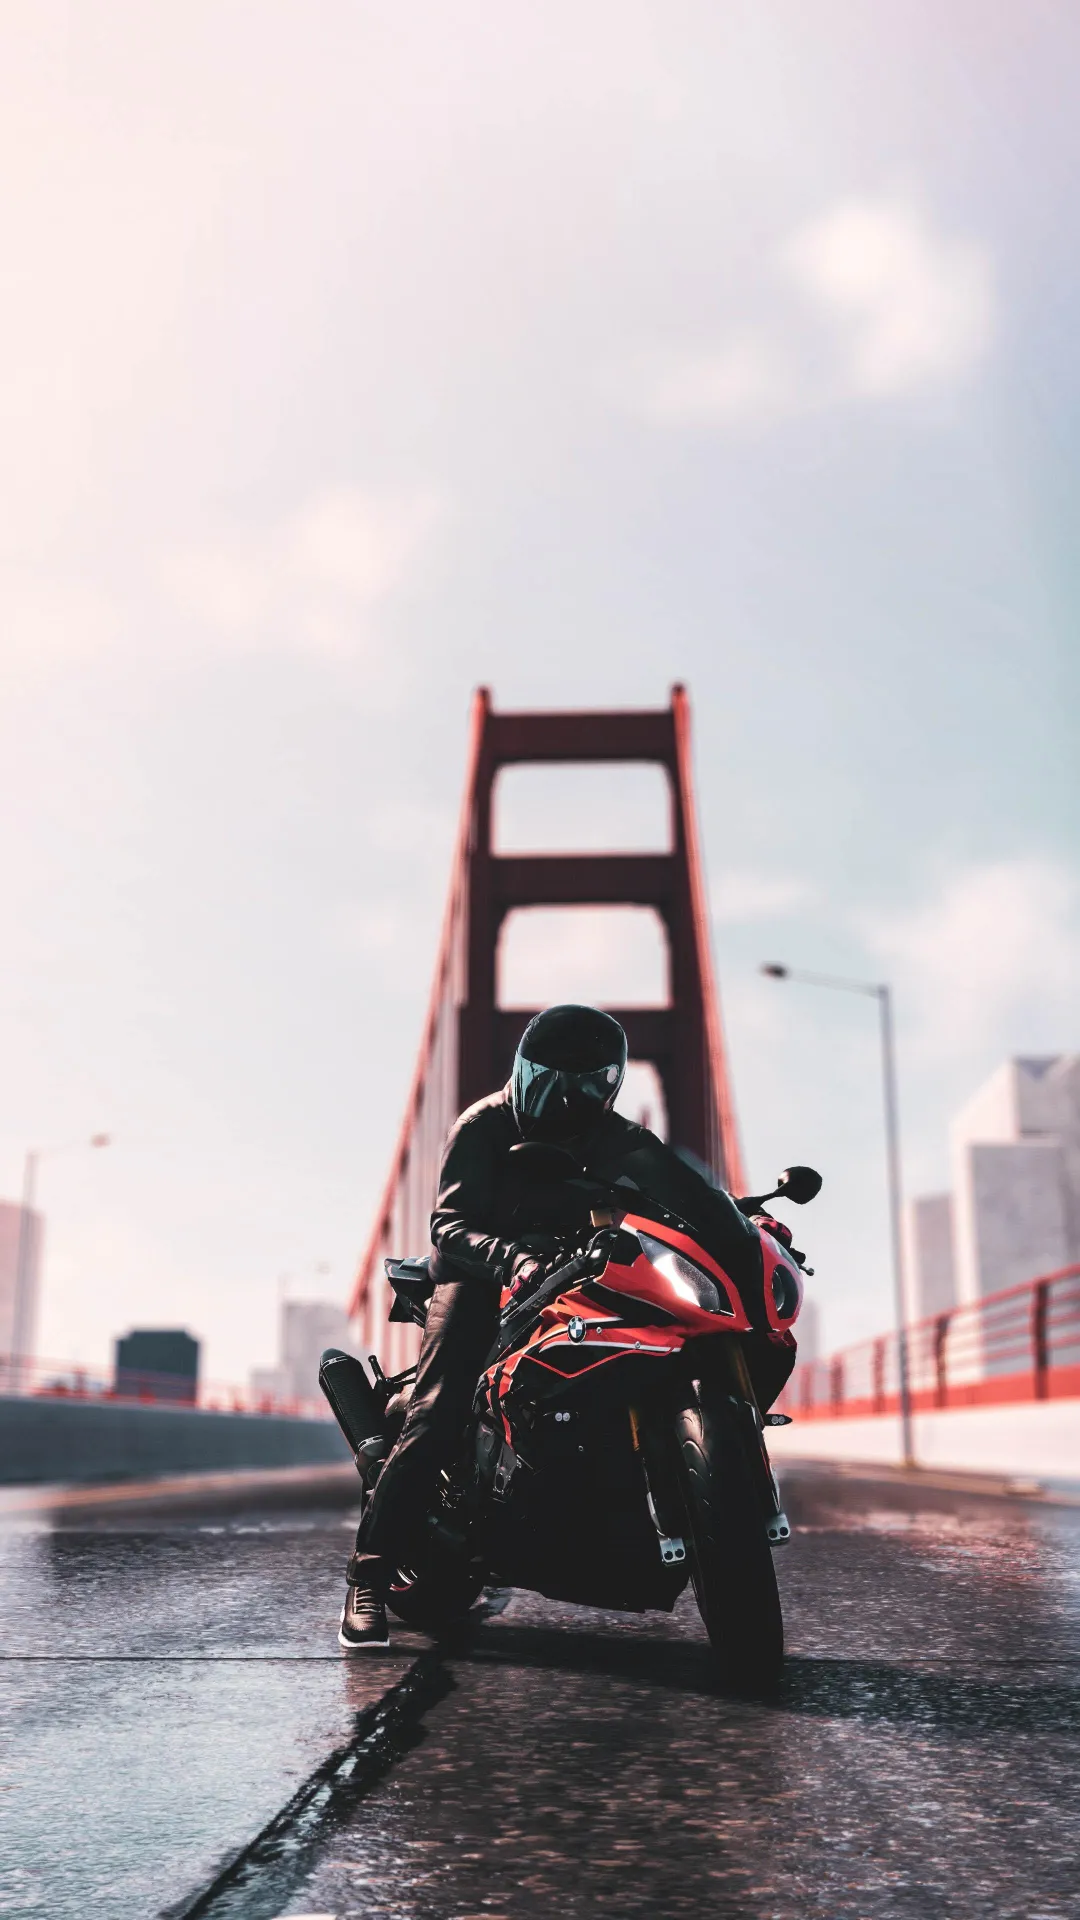 thumb for Bmw Red Bike Rider Wallpaper